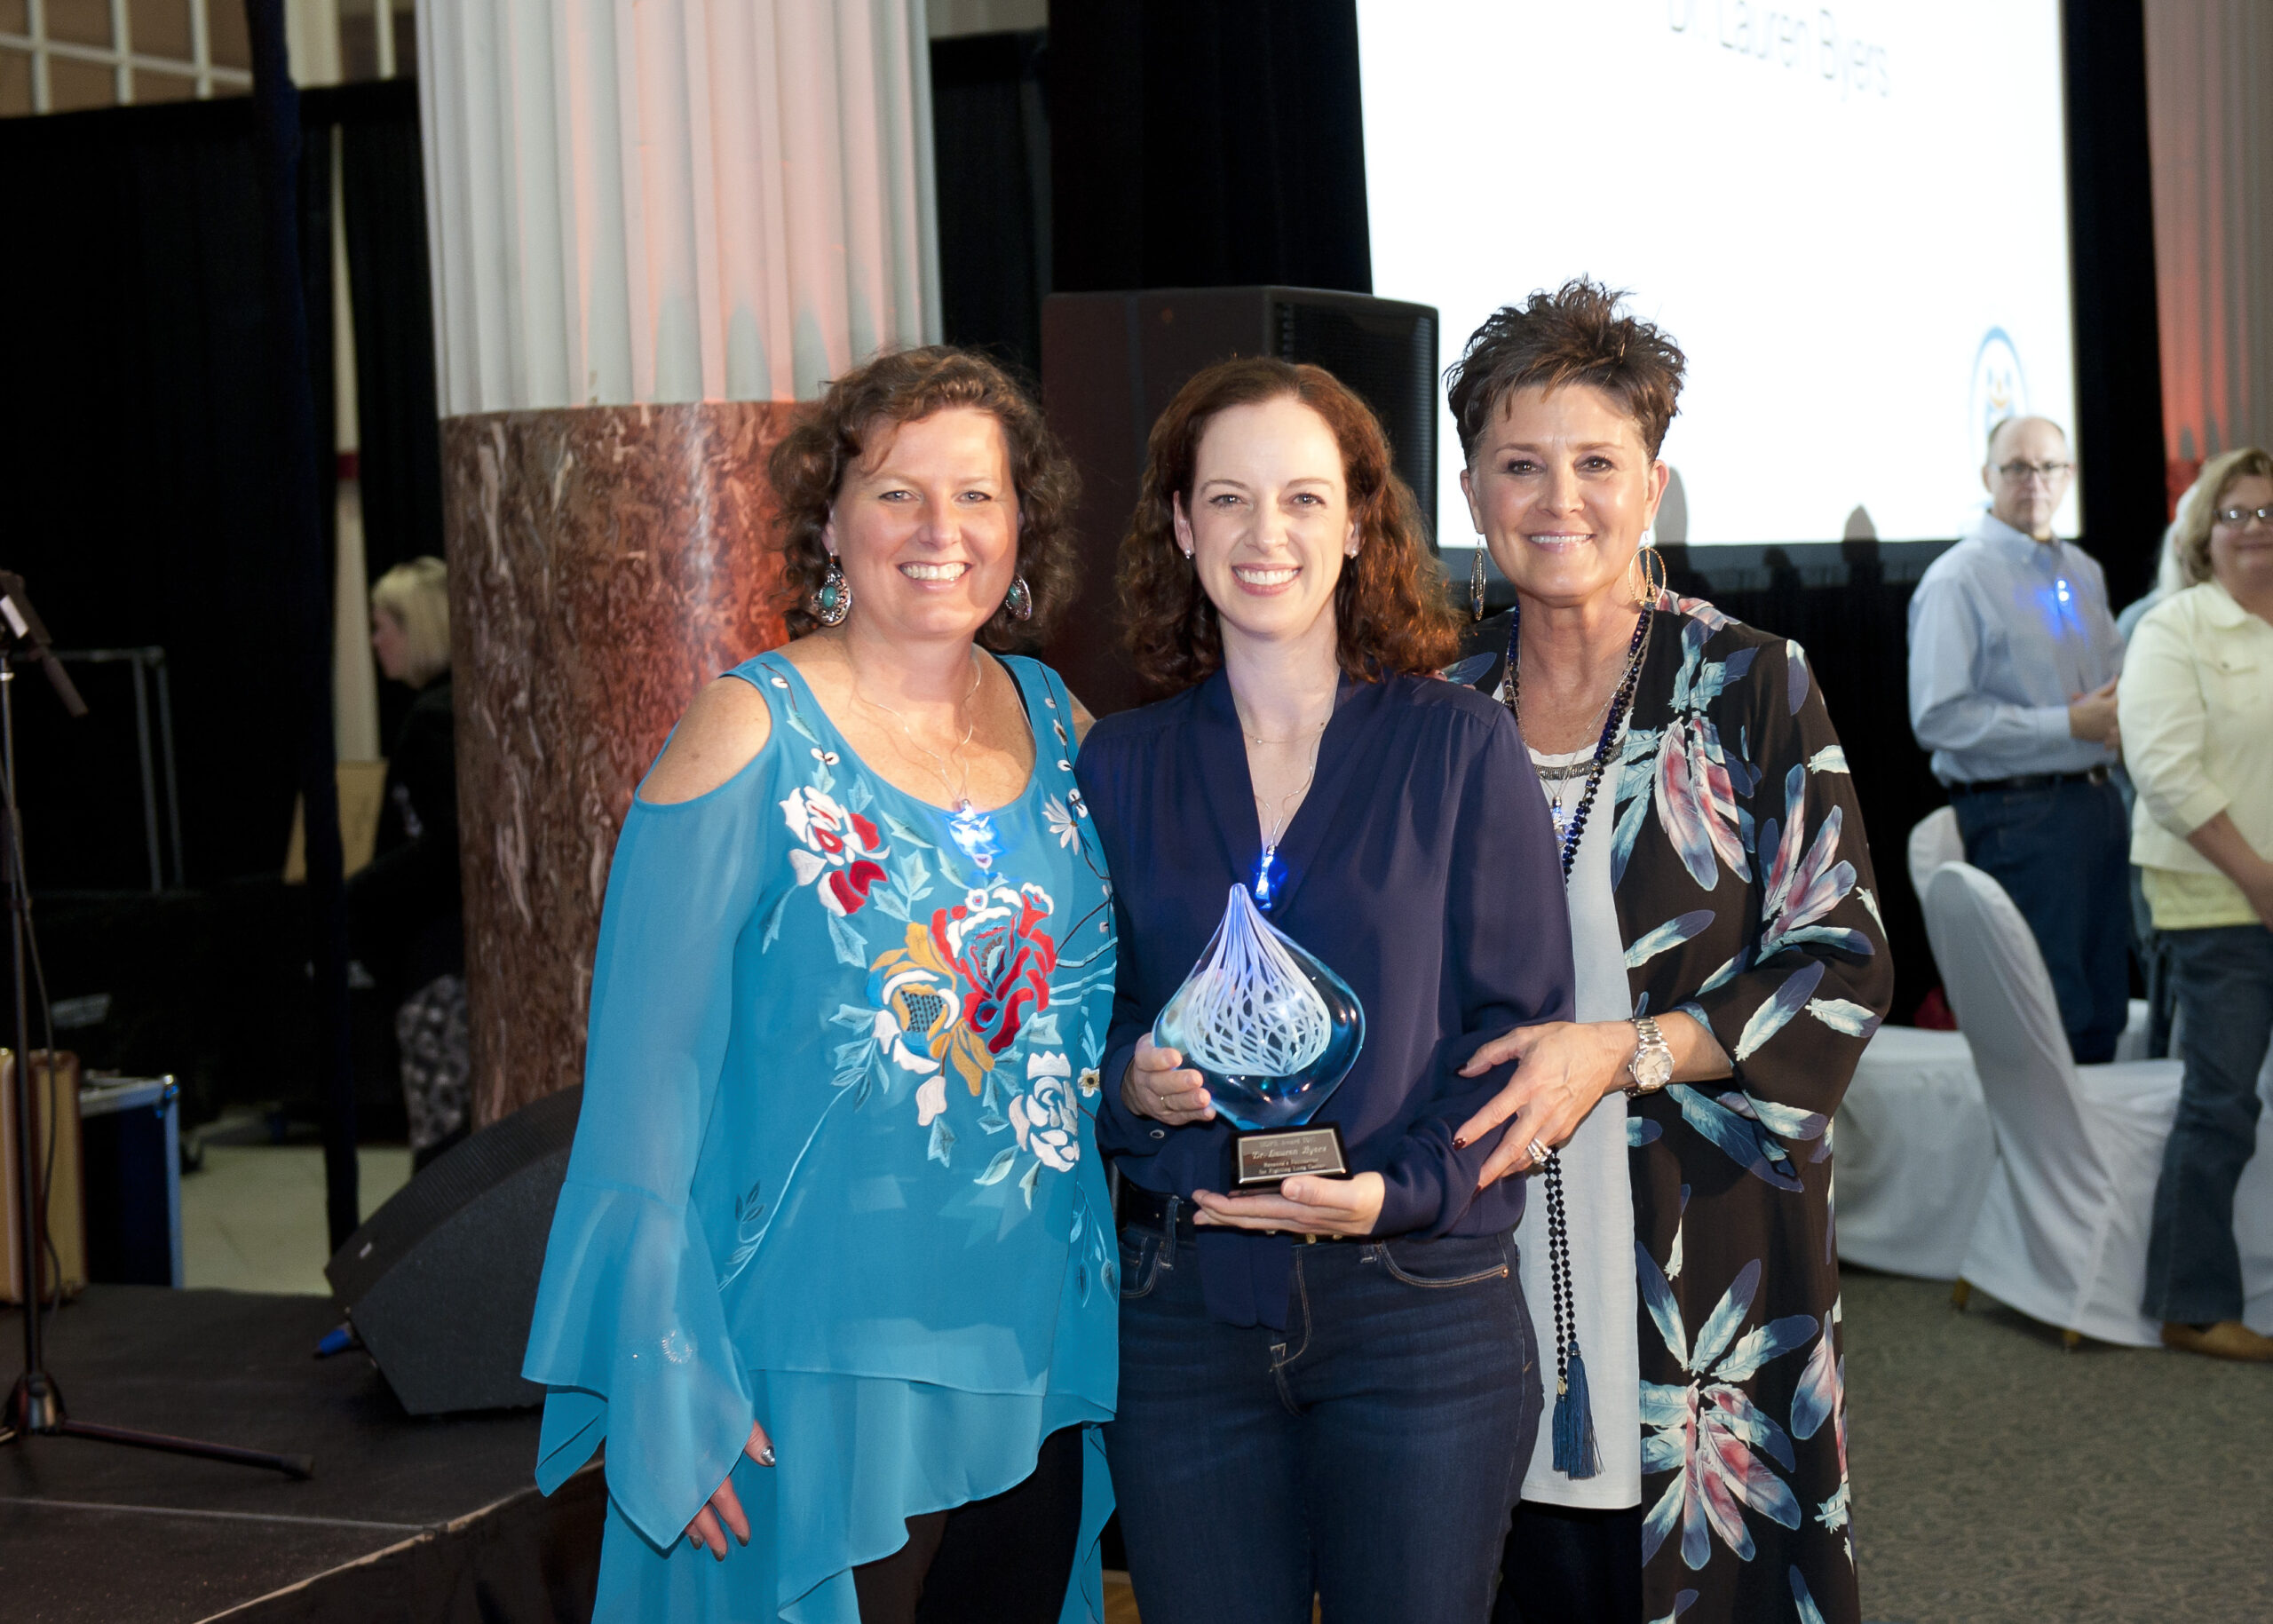 Image of Pictured left to right: Lisa Spain (Executive Director), Dr. Lauren Byers (M.D. Anderson), Sandy Sledge (Board Member)